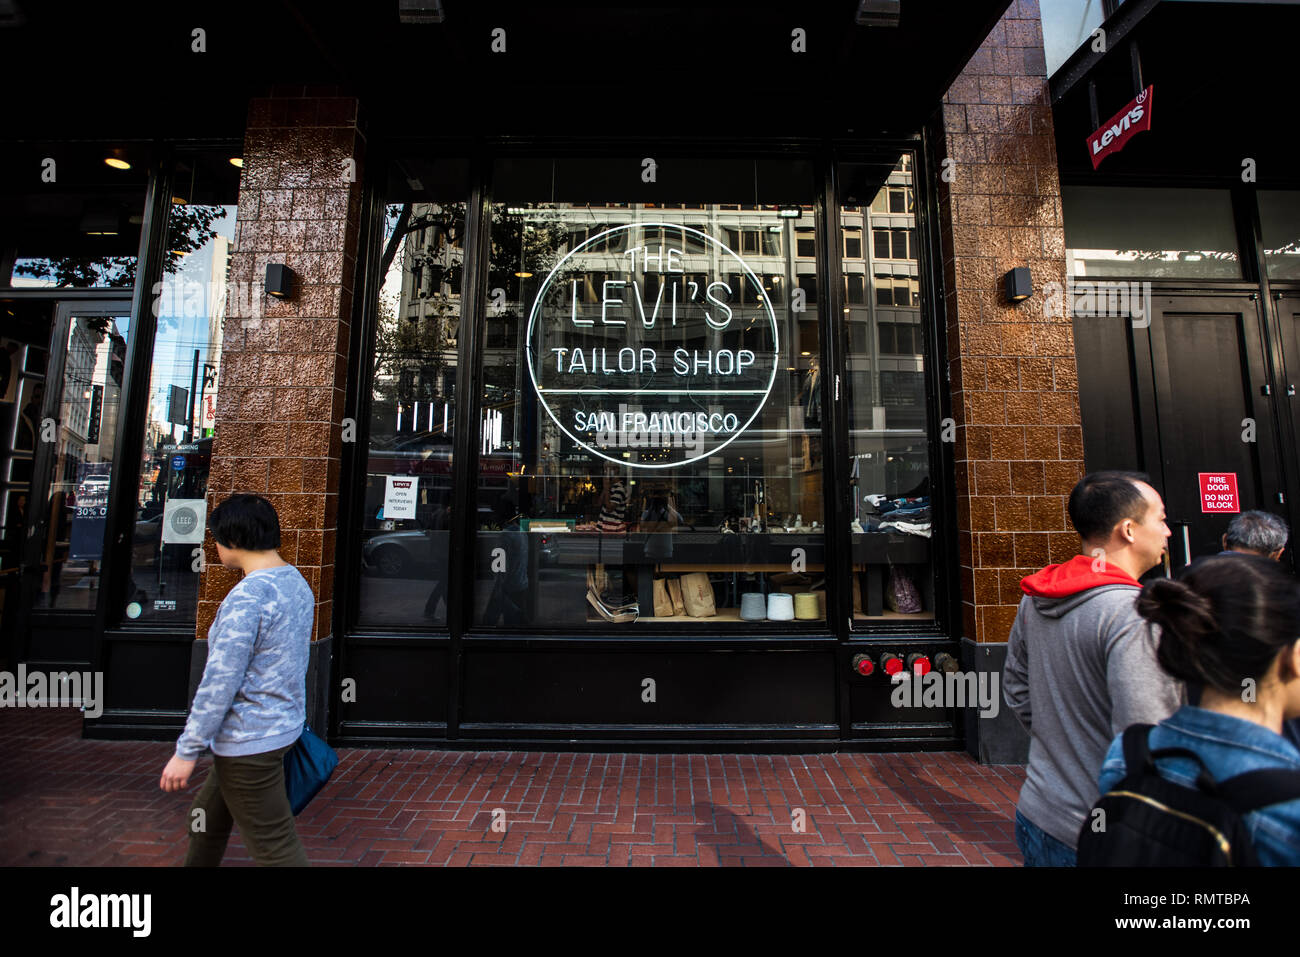 Levis Tailor Shop High Resolution Stock Photography and Images - Alamy